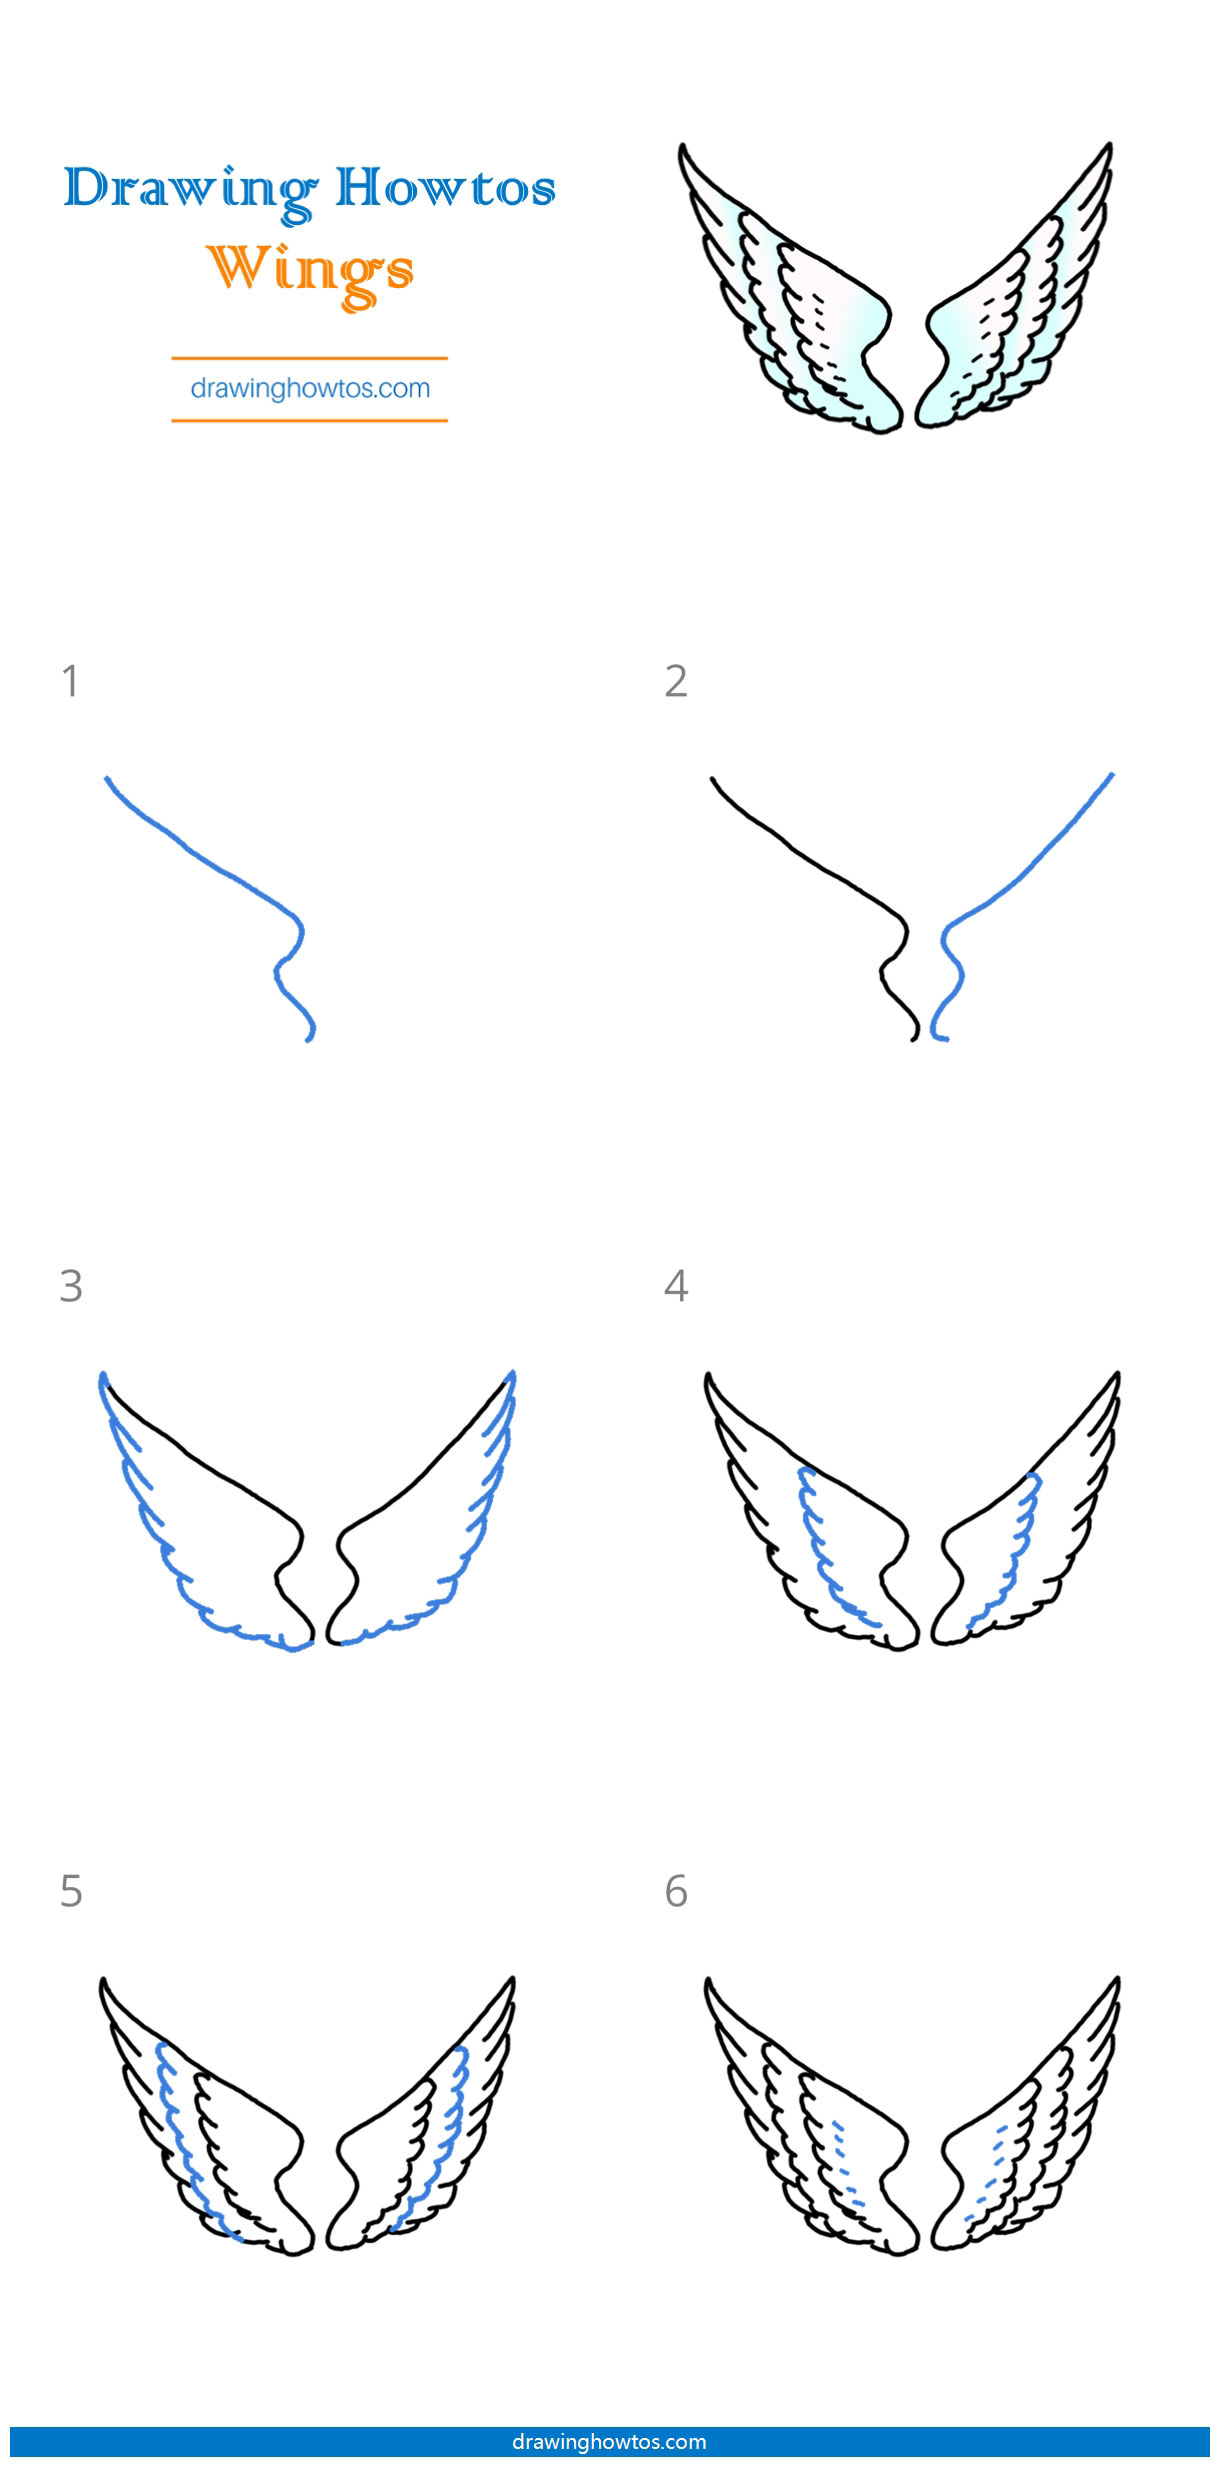 How to Draw Wings - Step by Step Easy Drawing Guides - Drawing Howtos